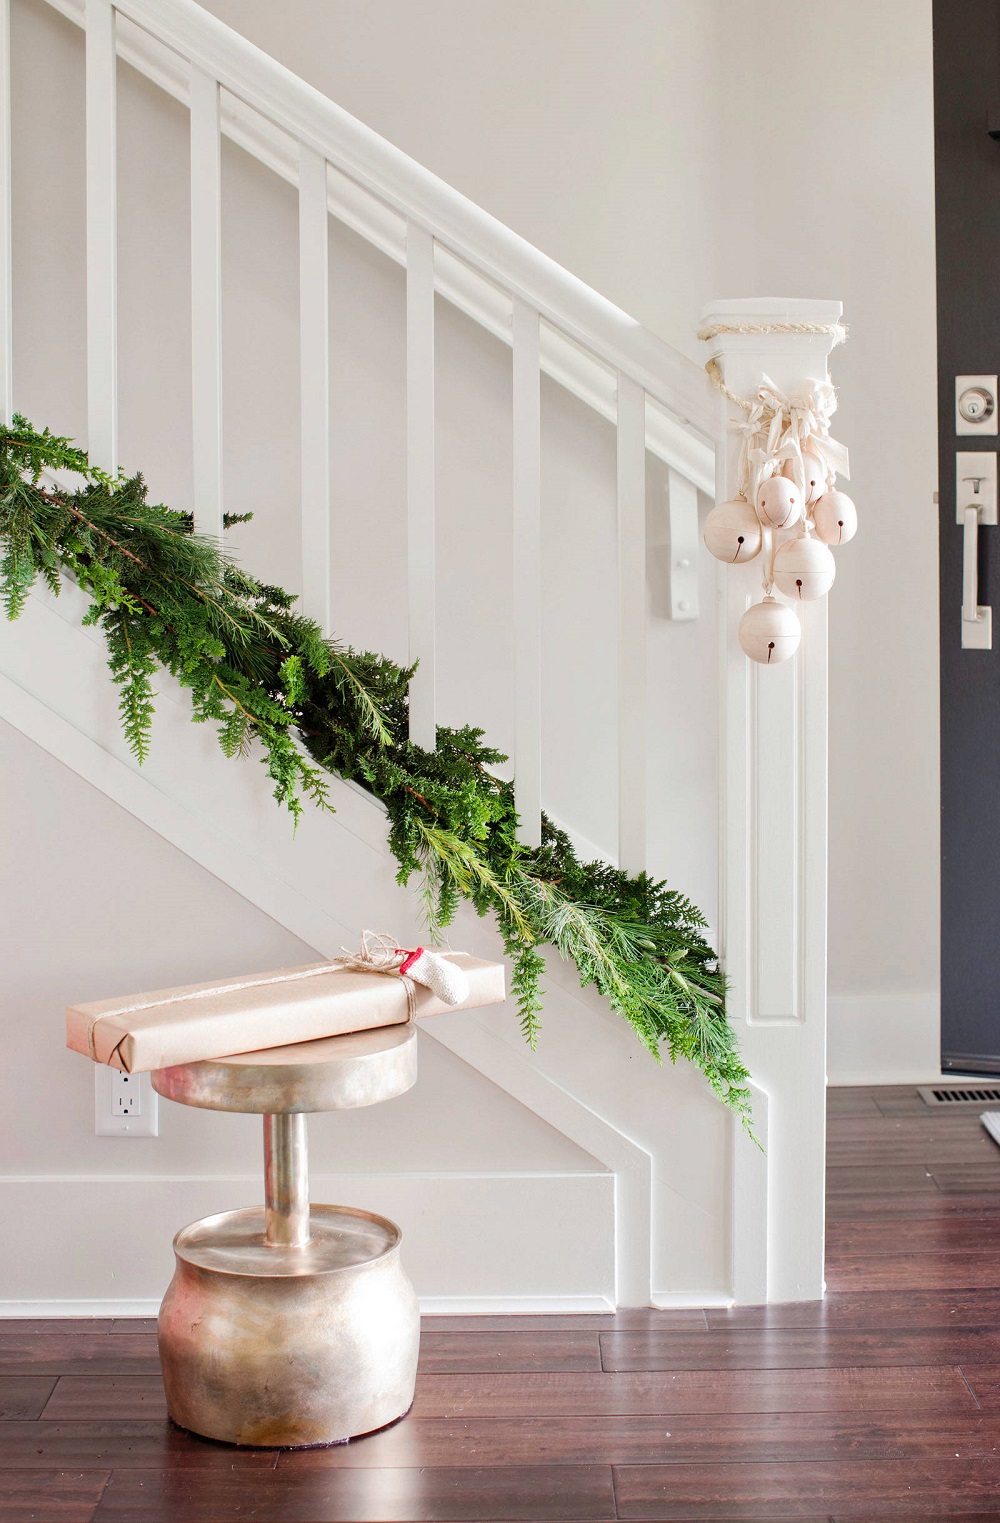 t3-1 Awesome Christmas staircase decorating ideas you should absolutely try